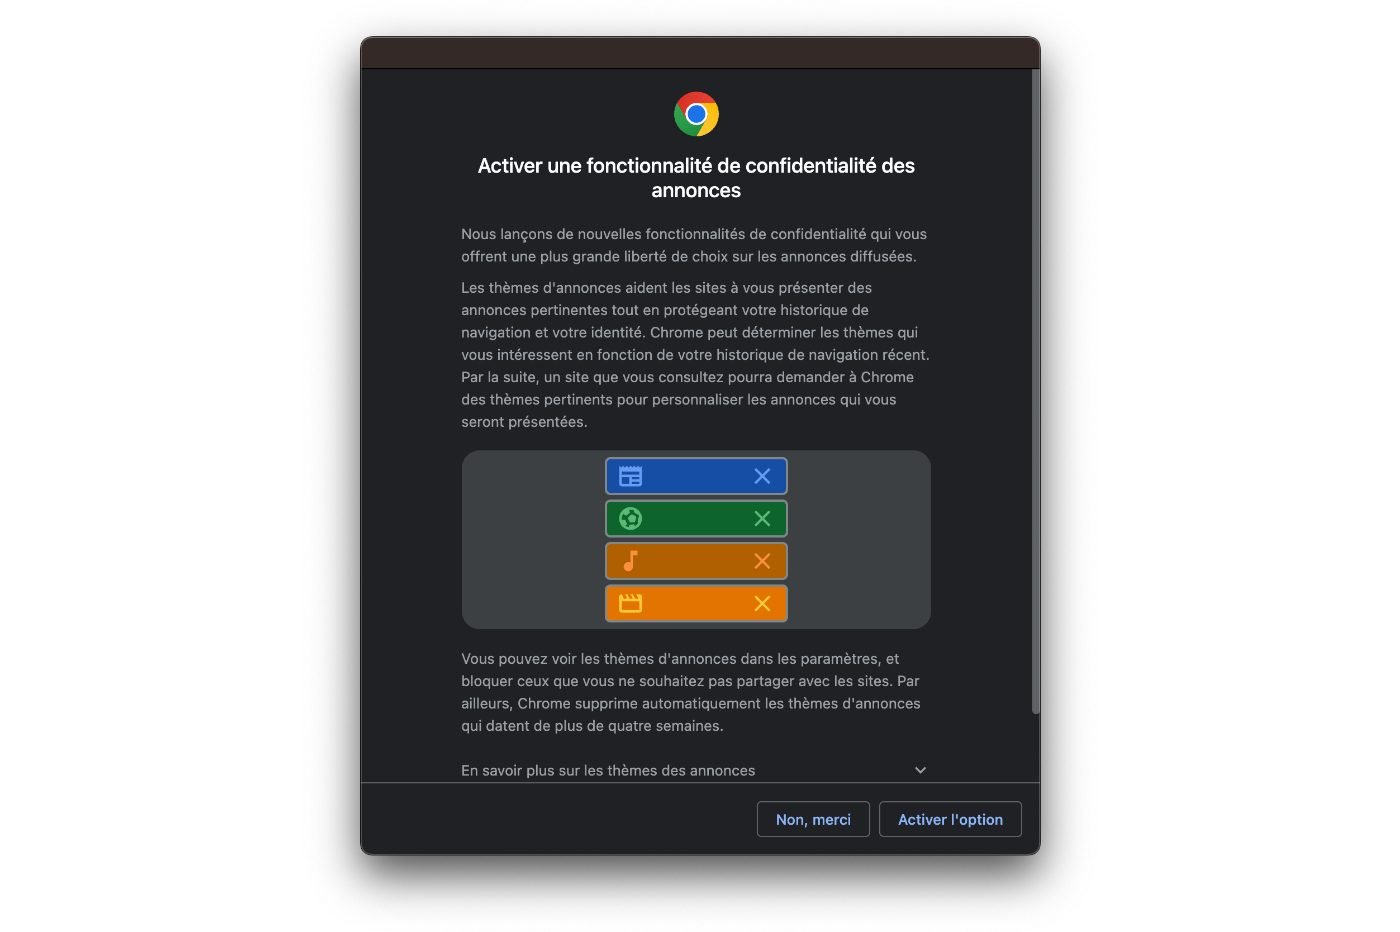 How do you prevent Google Chrome from using your browsing history to display personalized ads?